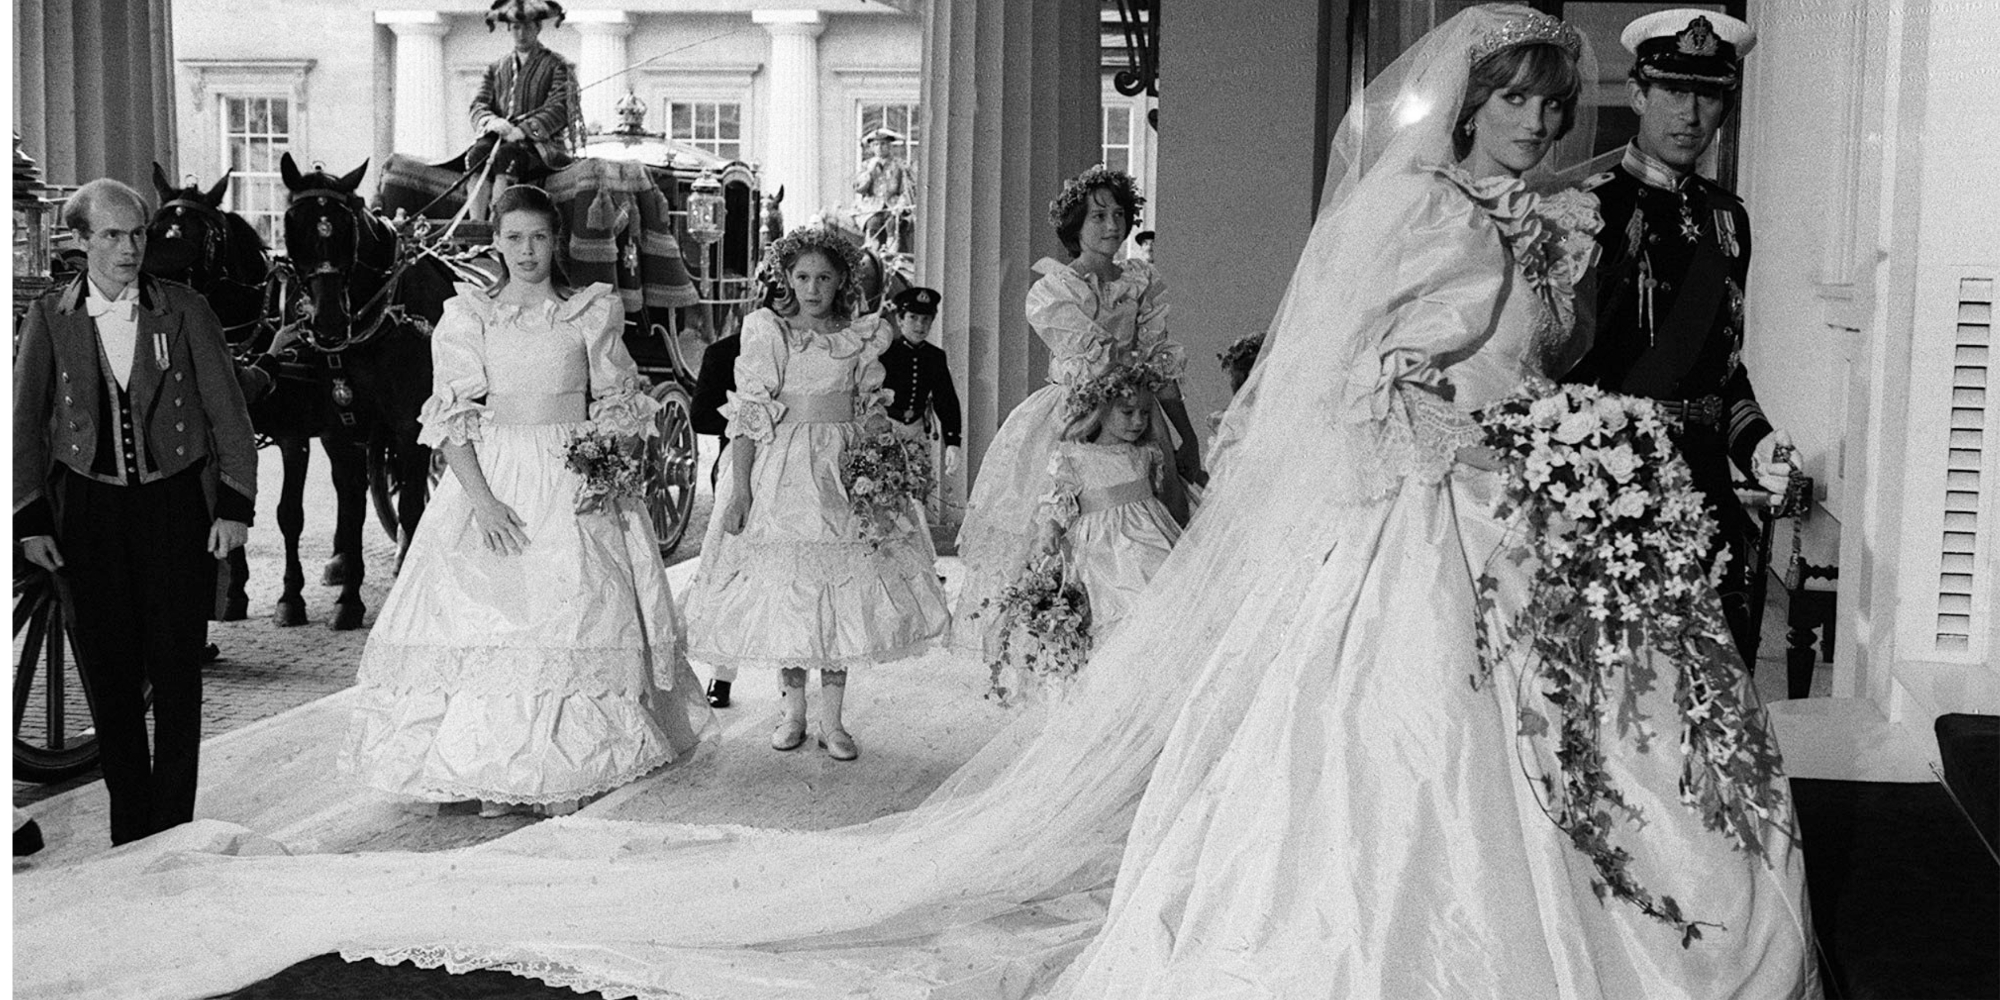 Princess Diana wore a wedding gown that was significantly different from a backup wedding dress ready for her wedding to Prince Charles.